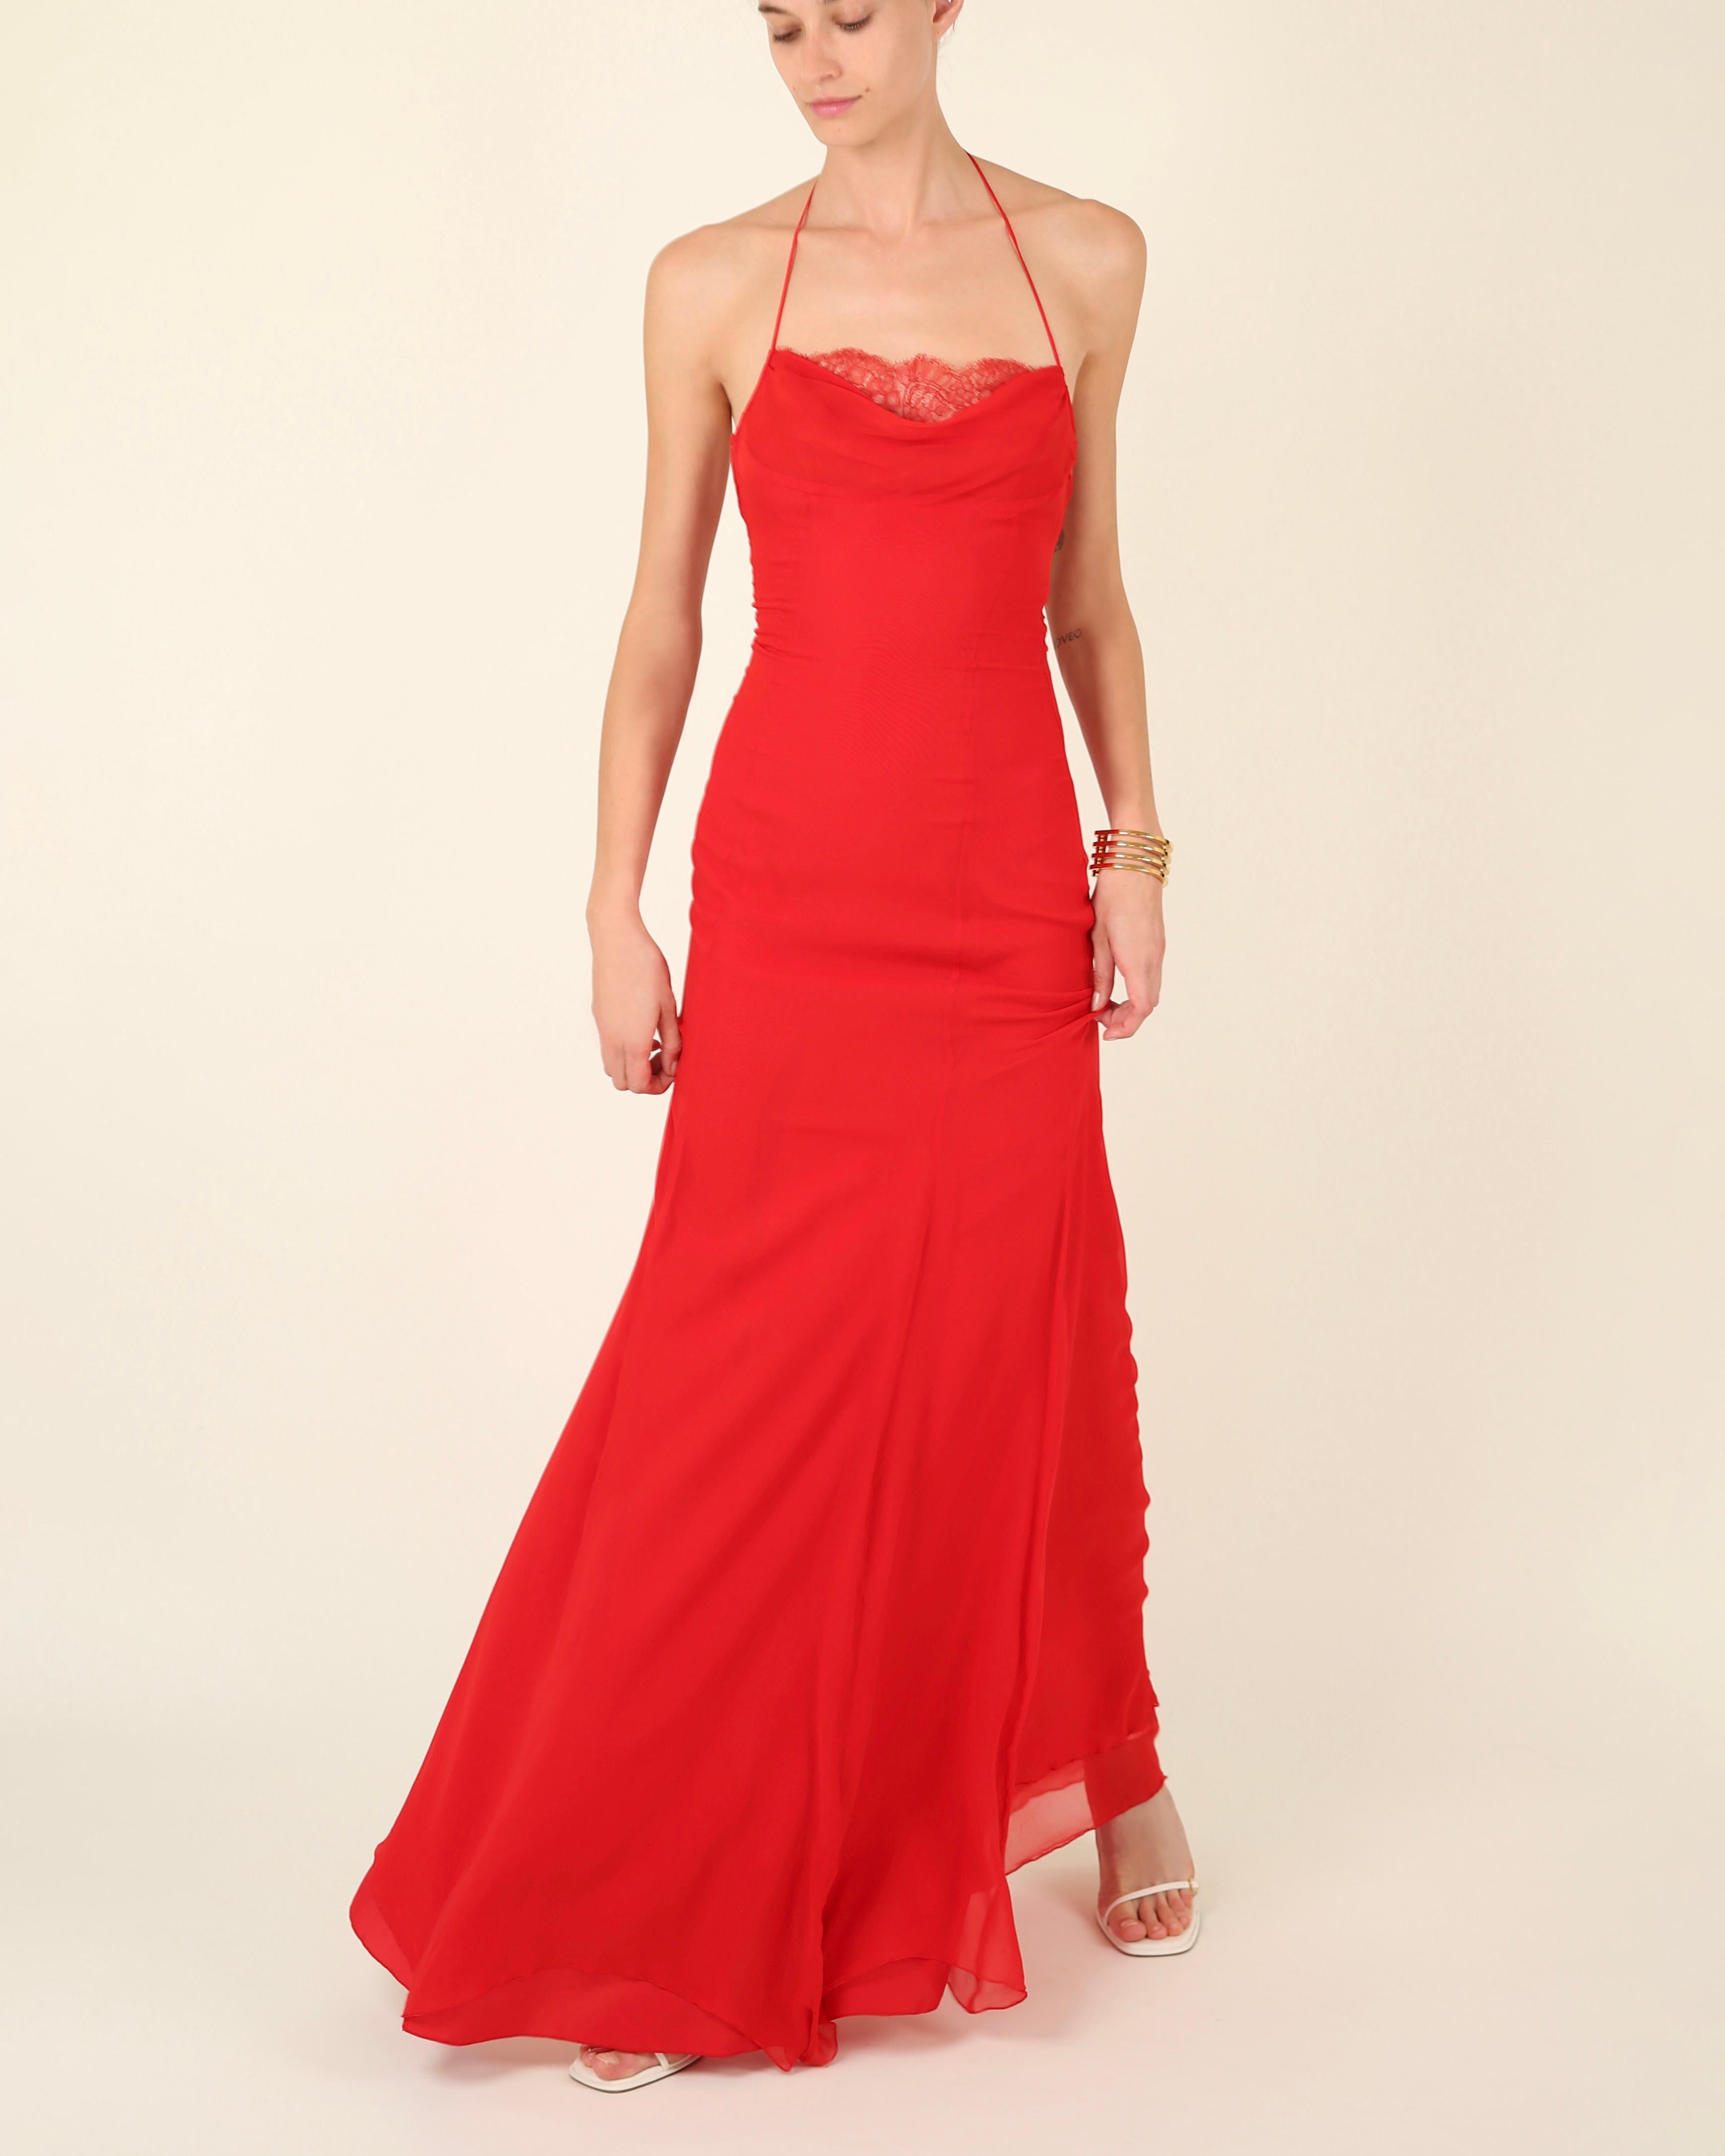 Valentino 1990's vintage red silk lace halter slip style gown dress IT 38 - 40 5